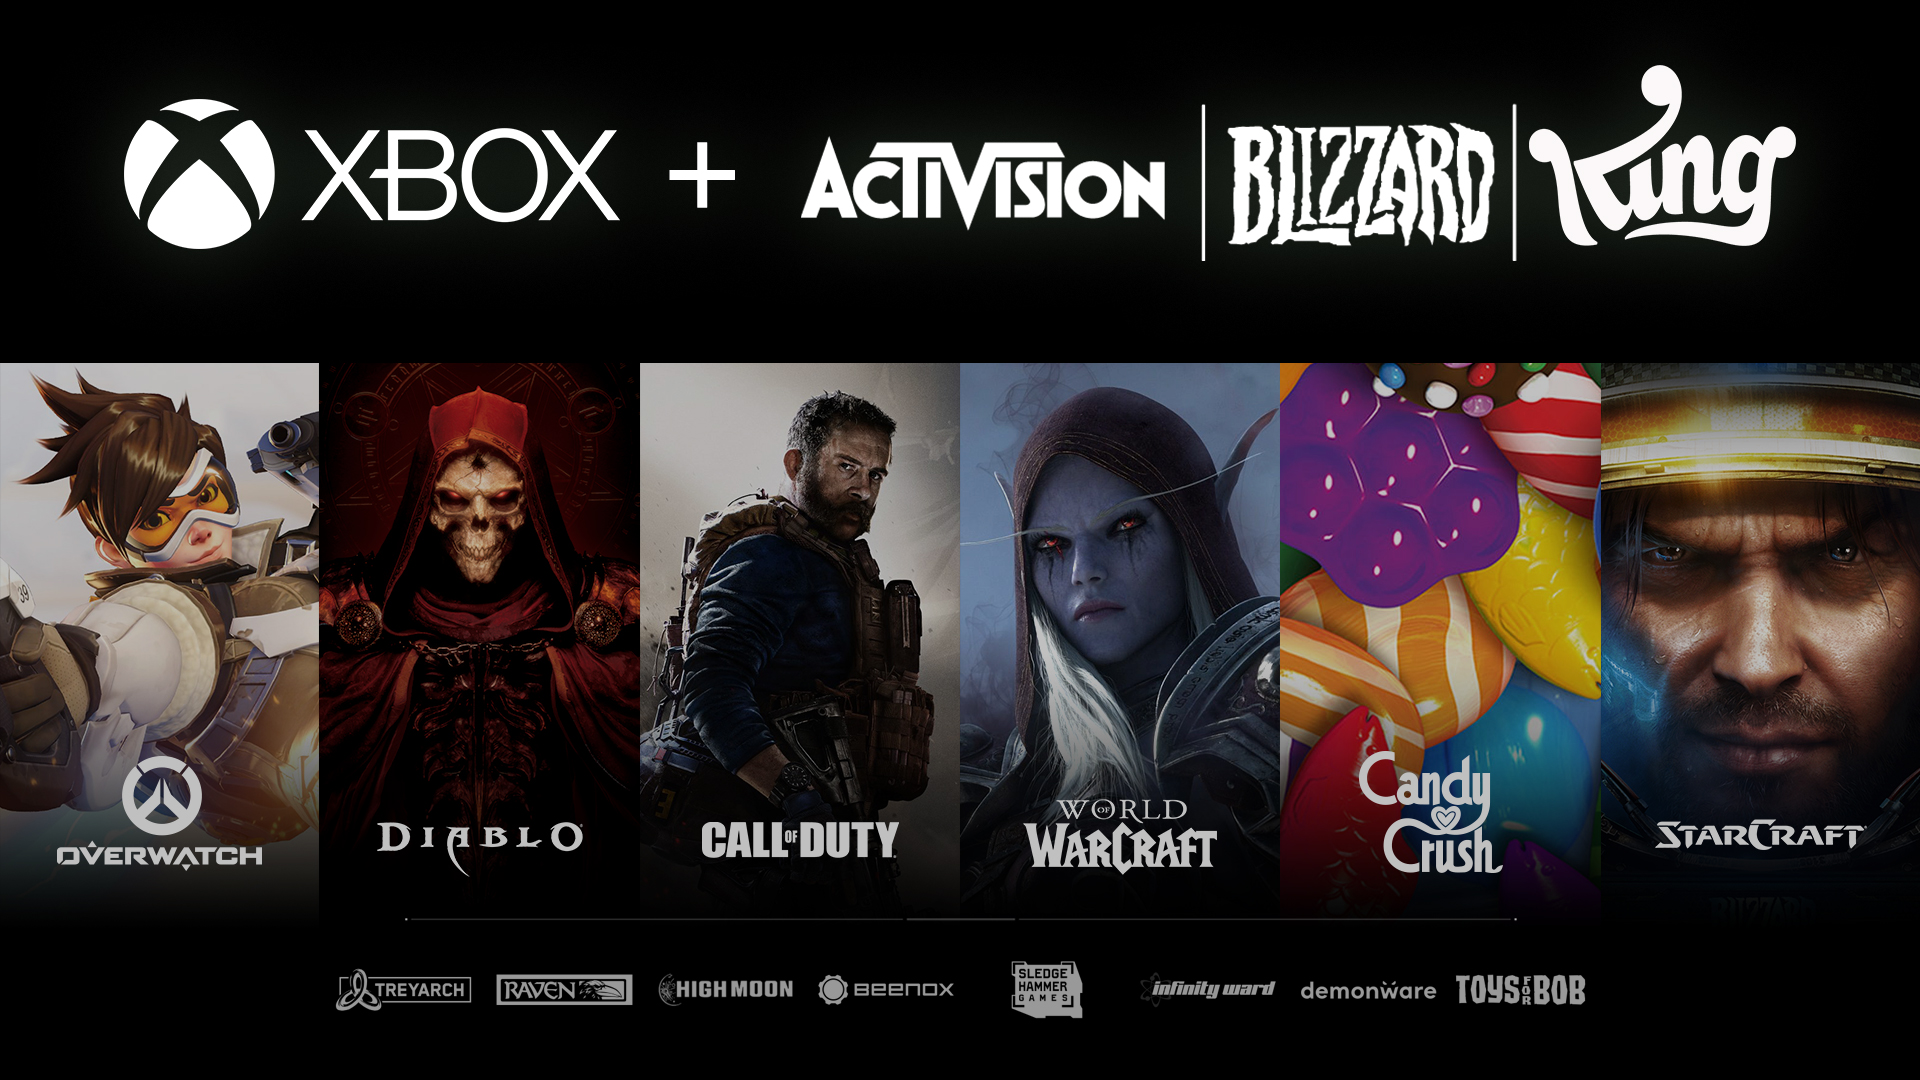 Text of the top of the image Reads “ Xbox + Activision/Blizzard/KING” with cover art from Overwatch, Diablo, Call of Duty, World of Warcraft, Candy Crush, and Starcraft places below. At the very bottom of the image, the logos from the studios Treyarch, Raven, High Moon, Beenox, Sledge Hamer Games, Infinity Ward, Demonware, and Toys for Bob.